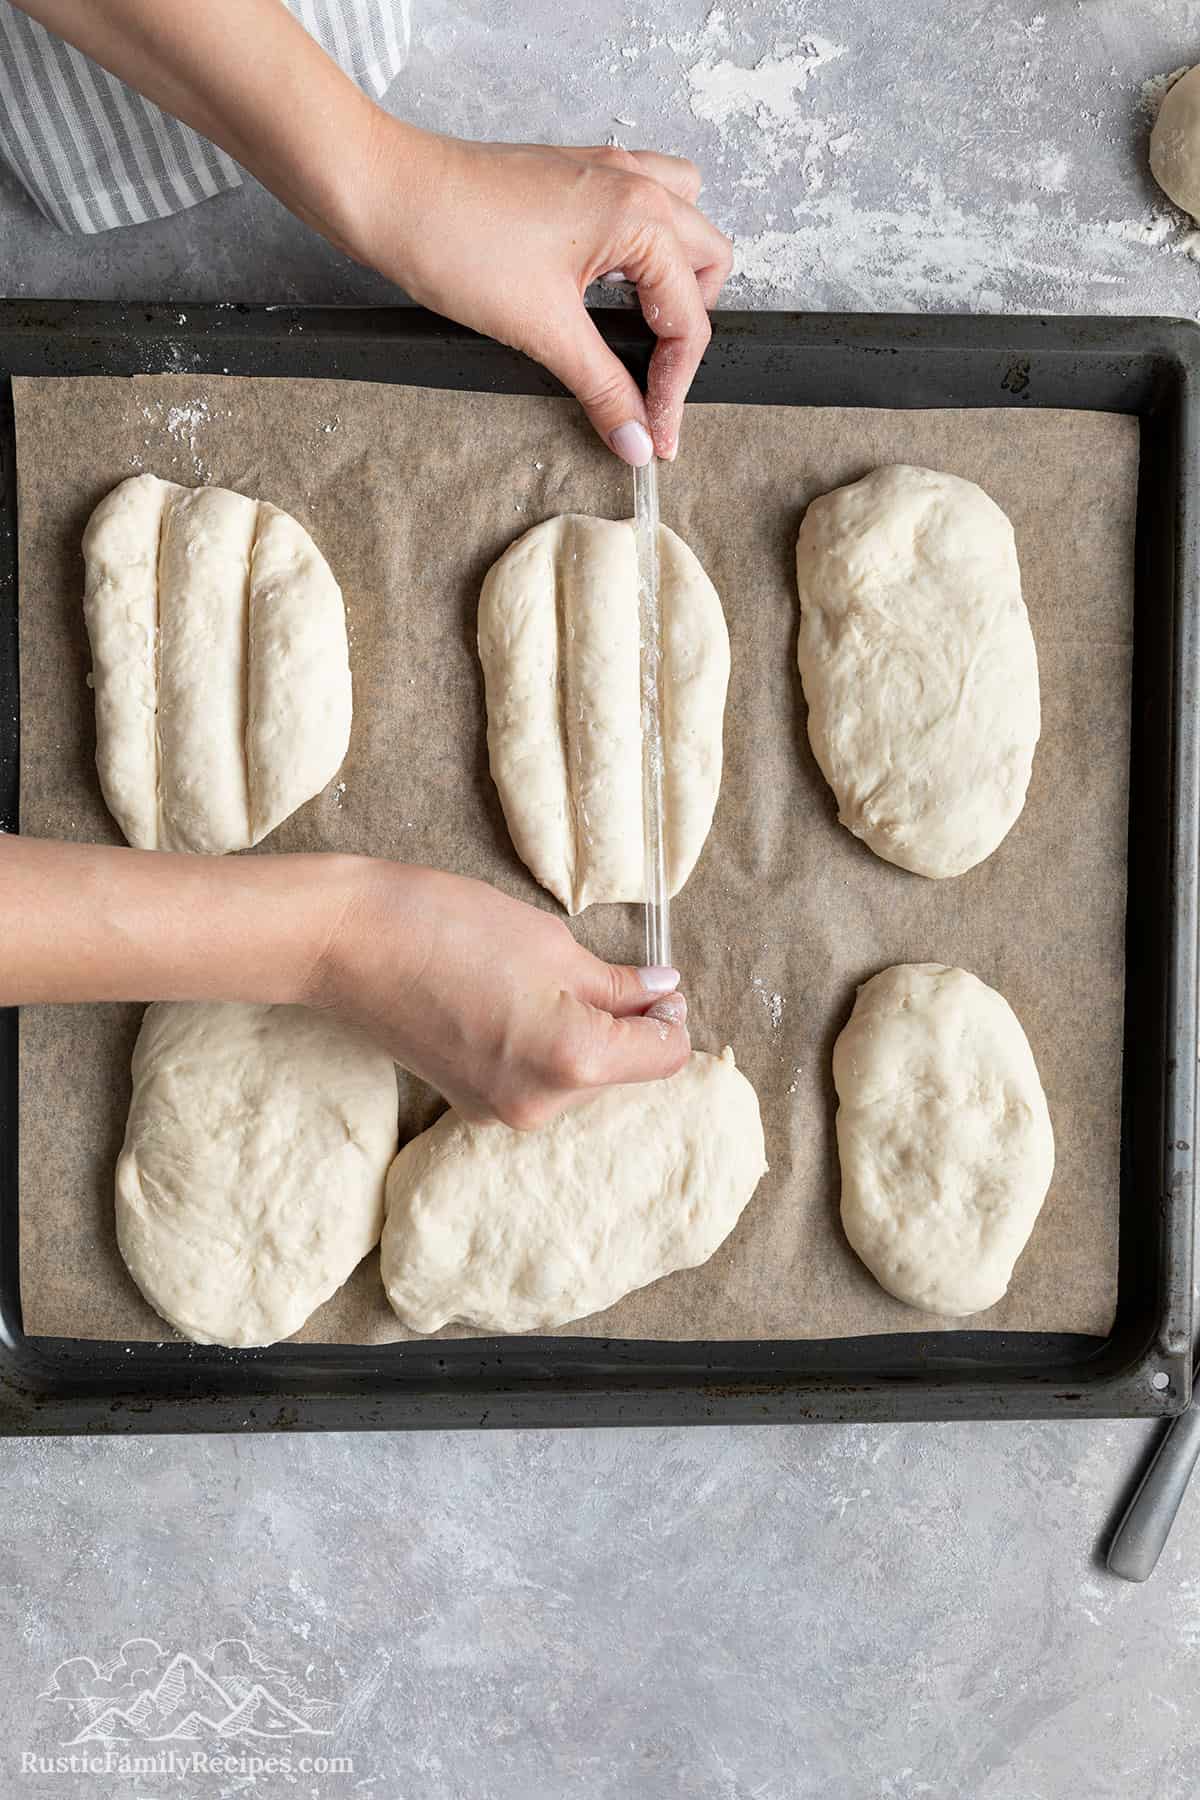 Making the second marking on each piece of dough with a straw.